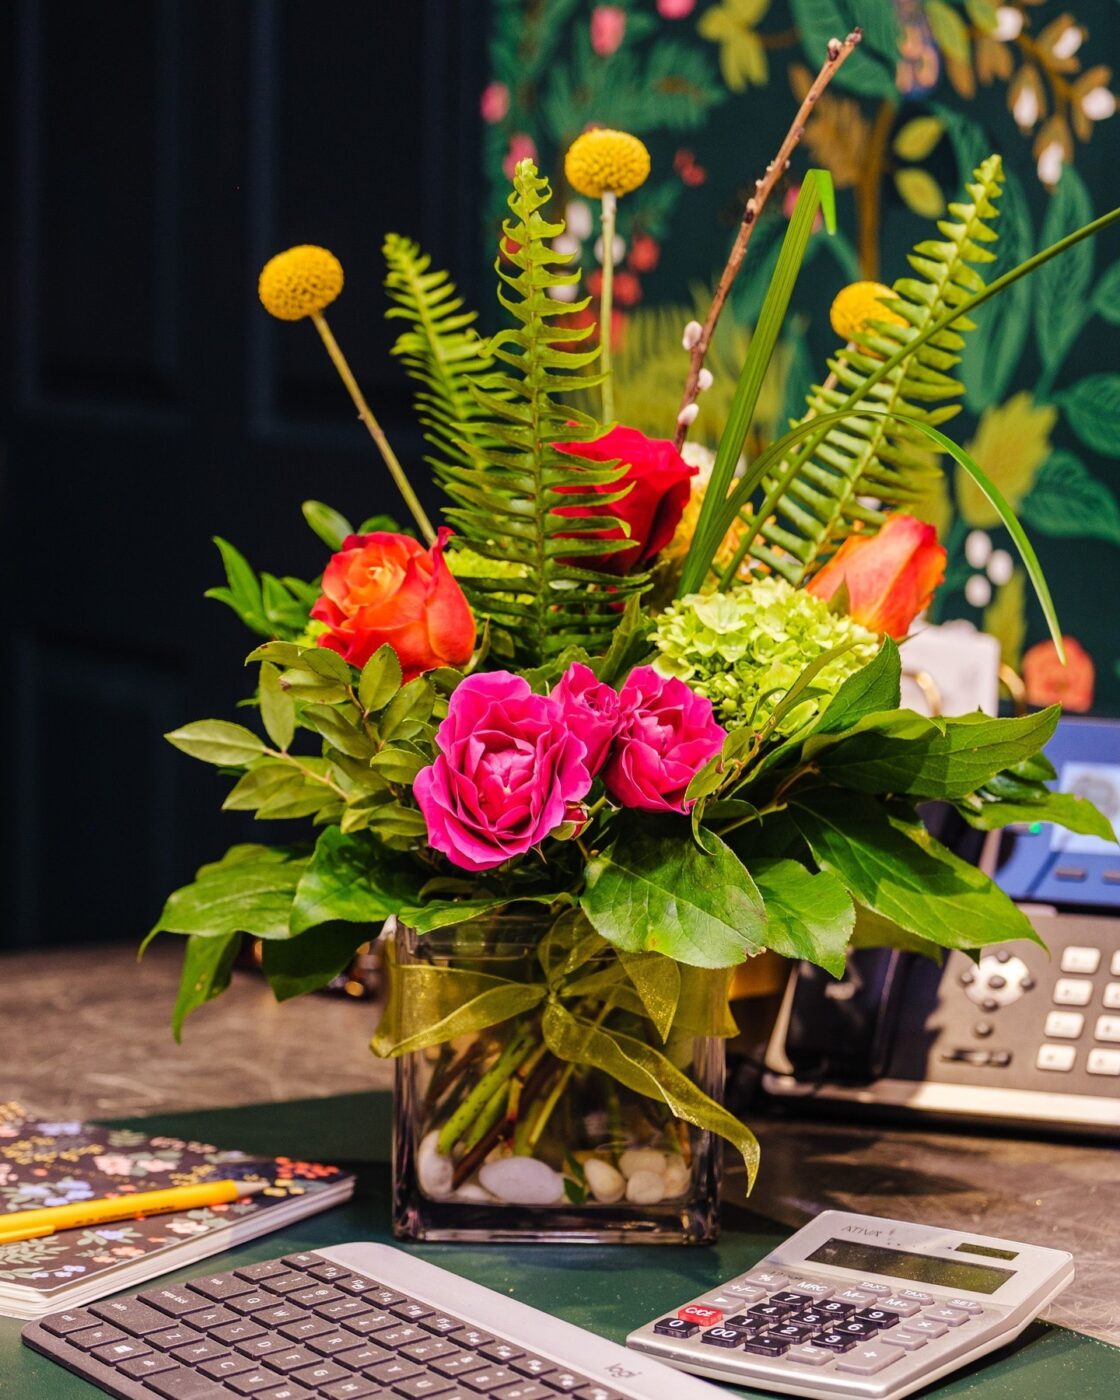 National Administrative Assistant Day is a week from today! Say thank you to the hardworking administrative professionals in your life with a gorgeous floral arrangement. A thoughtful gift is  the perfect way to show your appreciation and brighten their day. Order now and make their day extra special! #AdministrativeAssistantDay #FloralArrangements #ThankYou